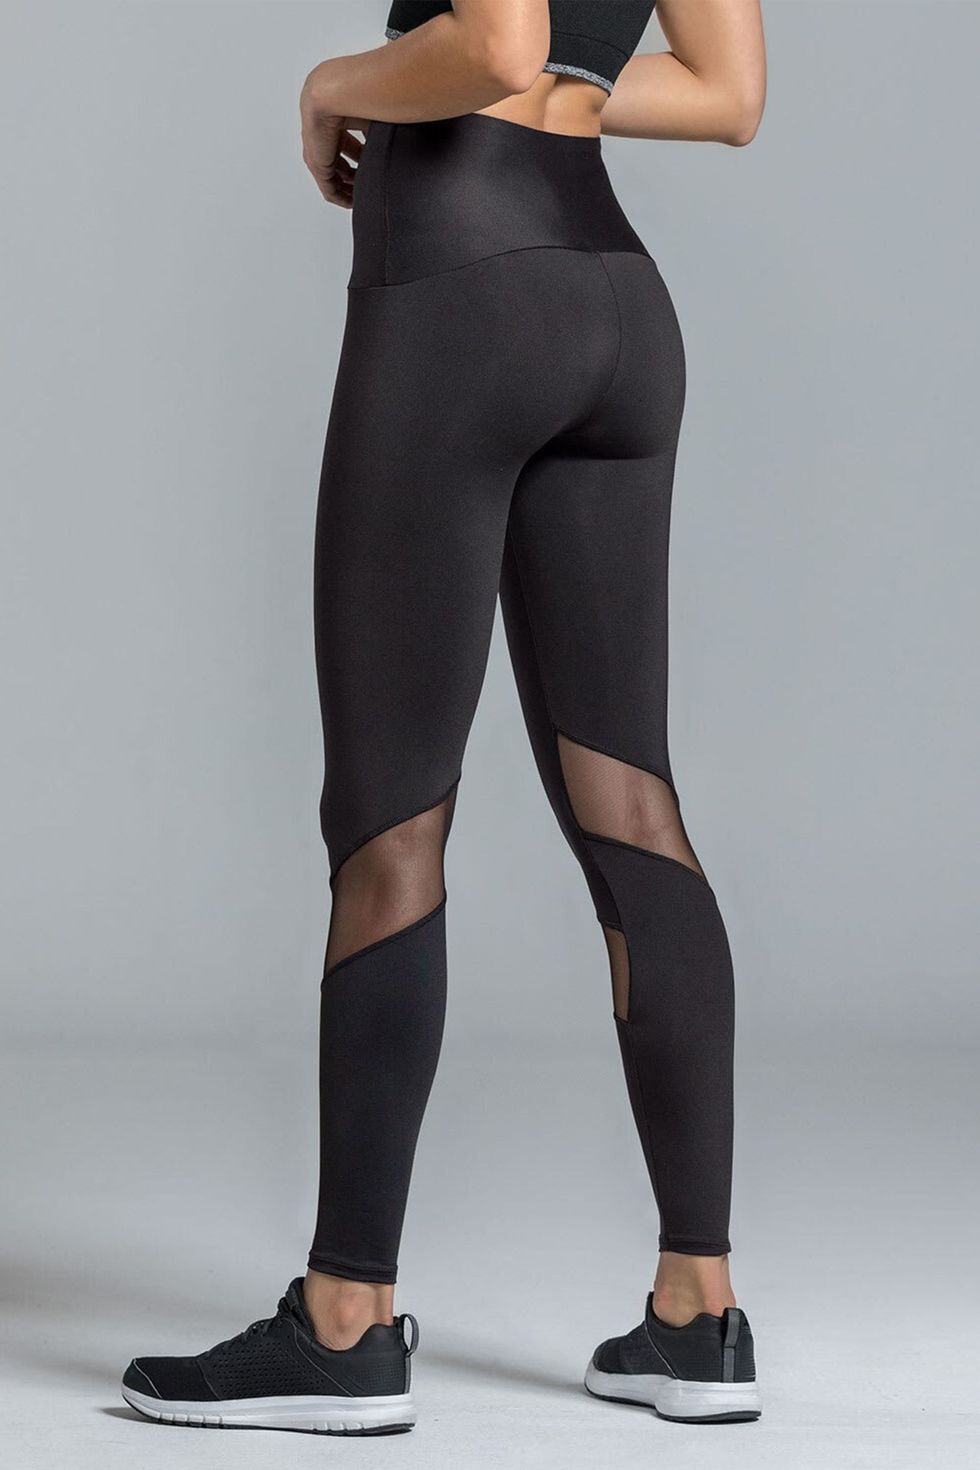 The Best Workout Leggings to Keep in Your Rotation - V Magazine